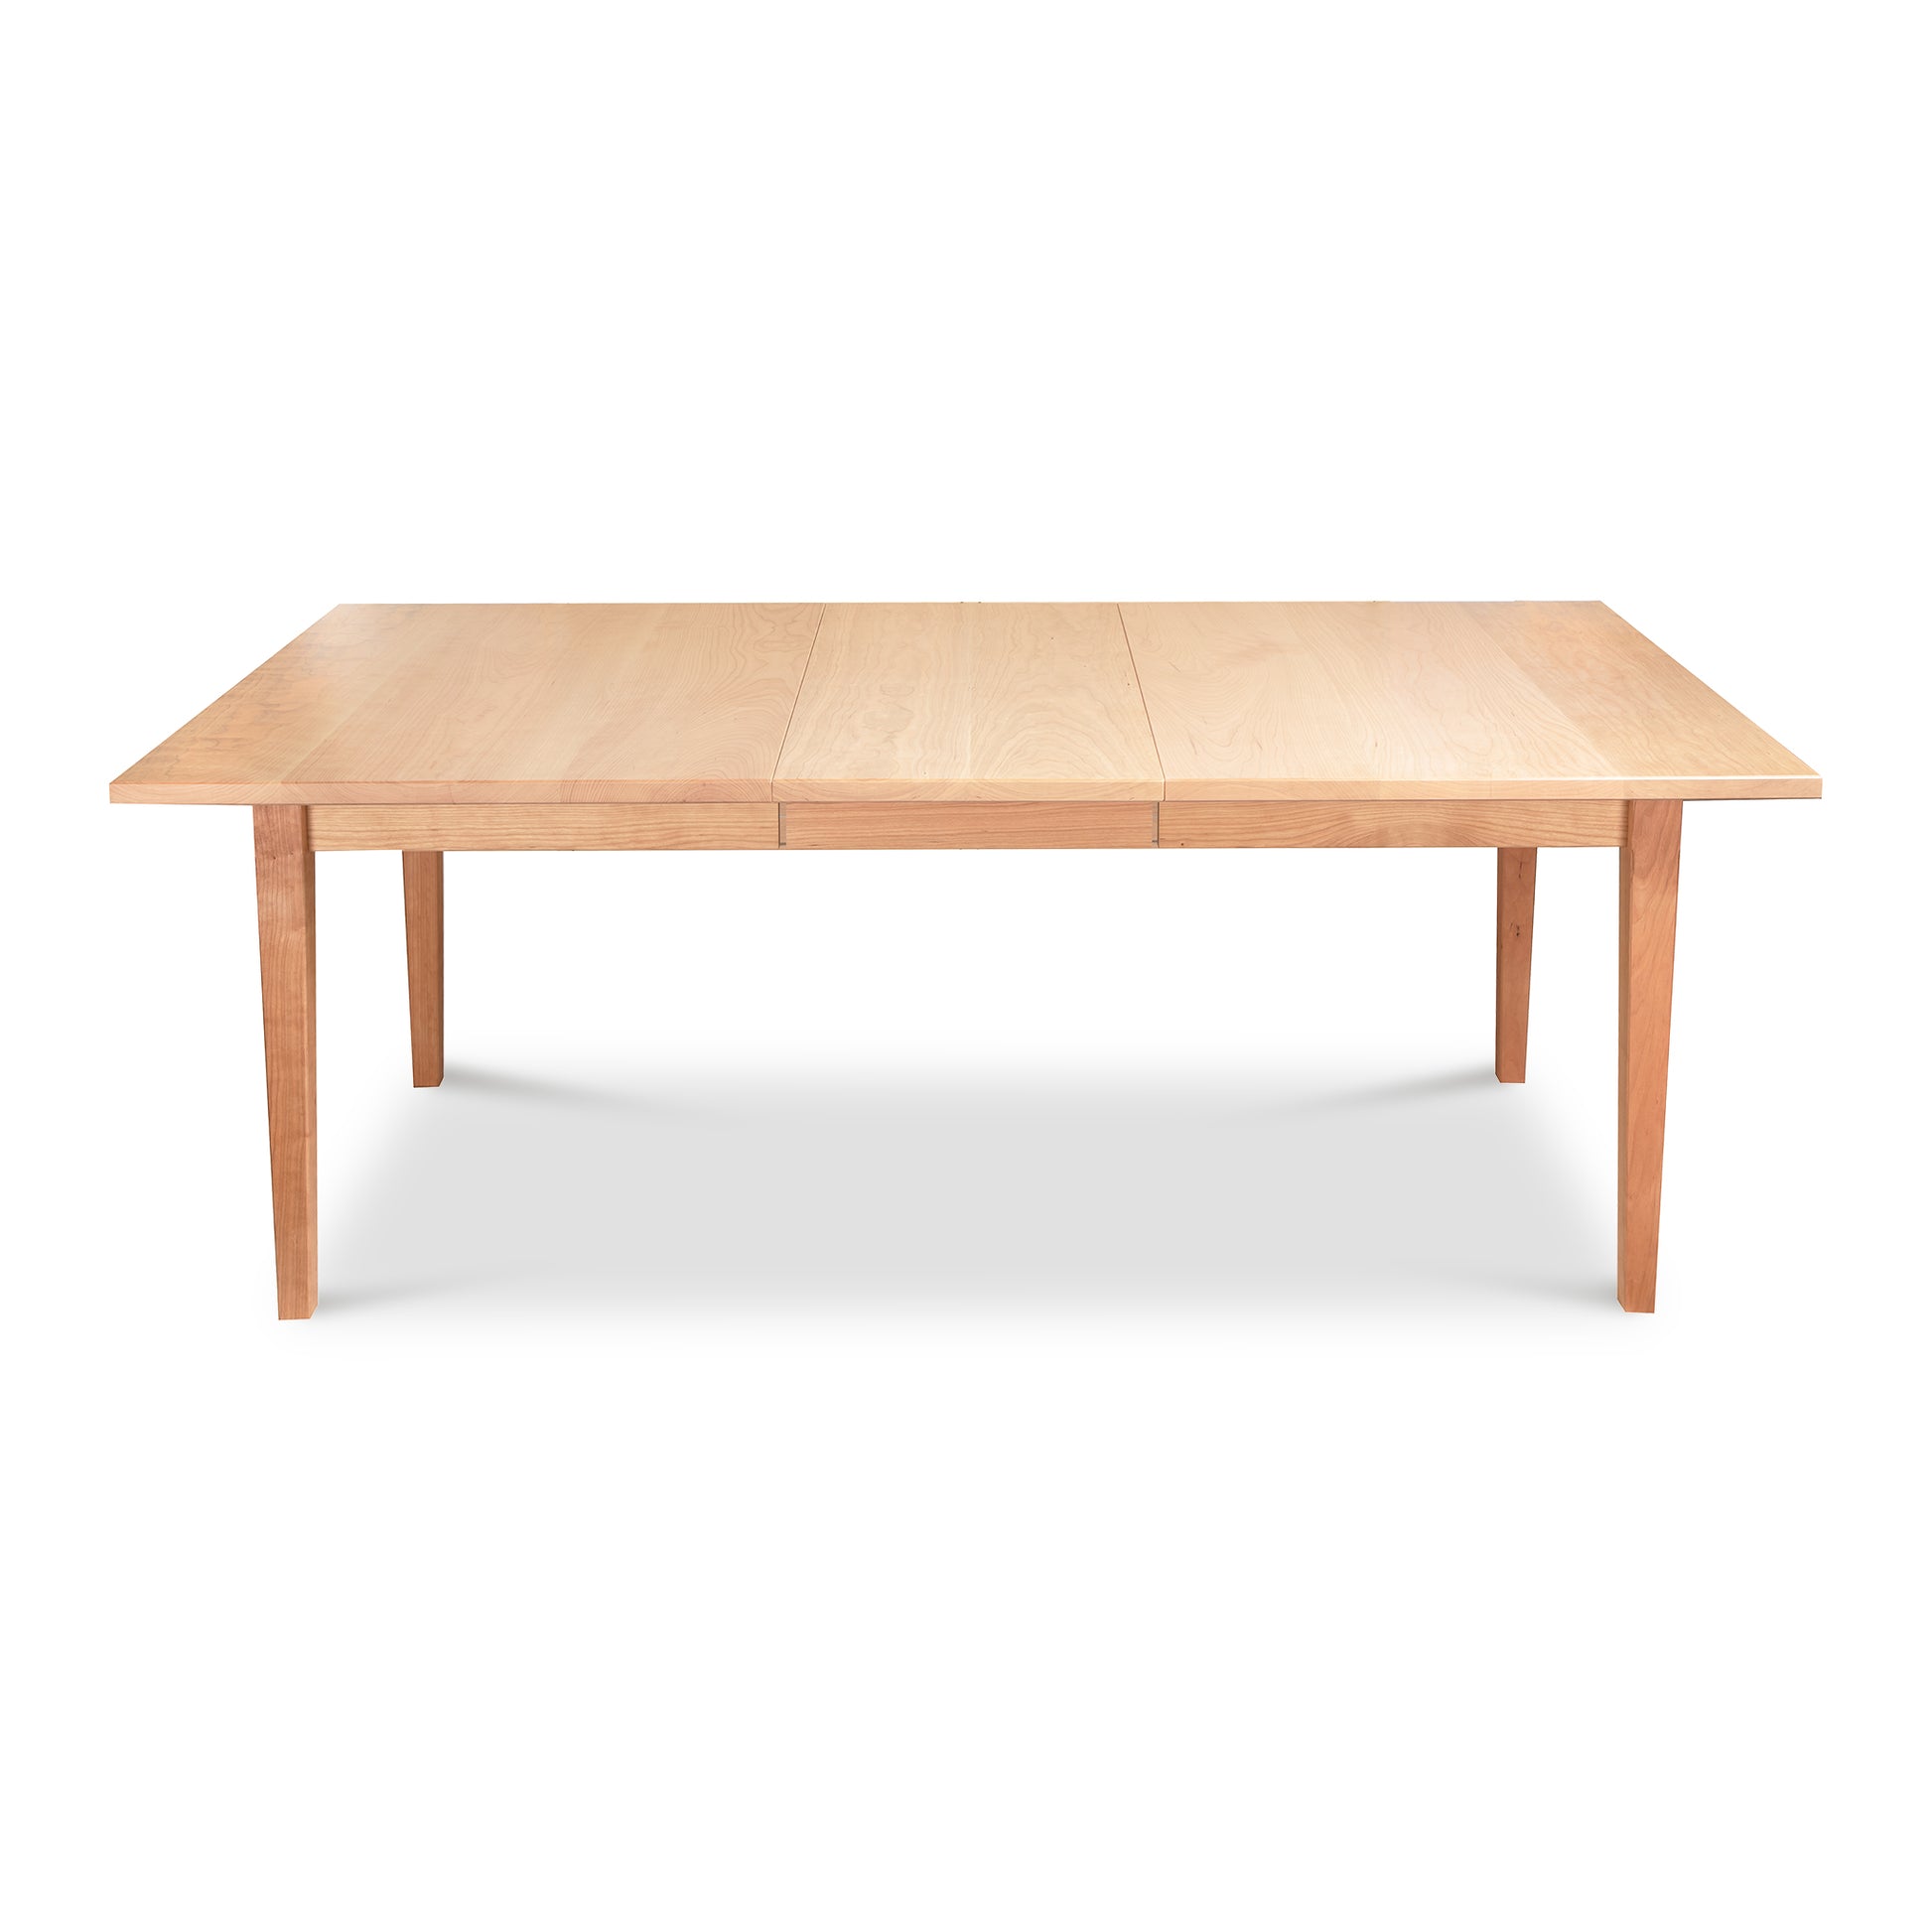 The handcrafted Maple Corner Woodworks Vermont Shaker Rectangular Extension Dining Table is a stunning example of solid wood craftsmanship, featuring a beautiful wooden top.